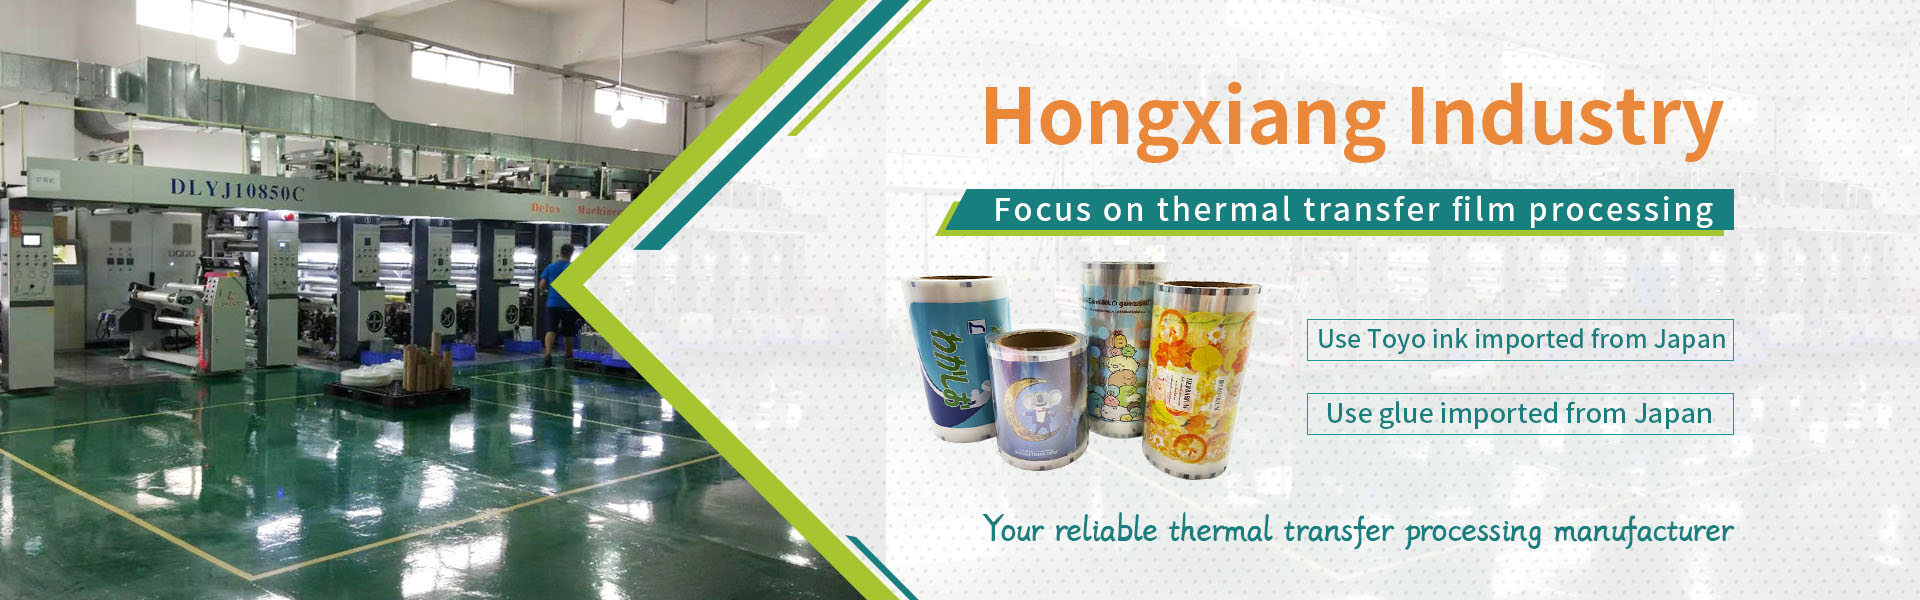 Thermal transfer processing